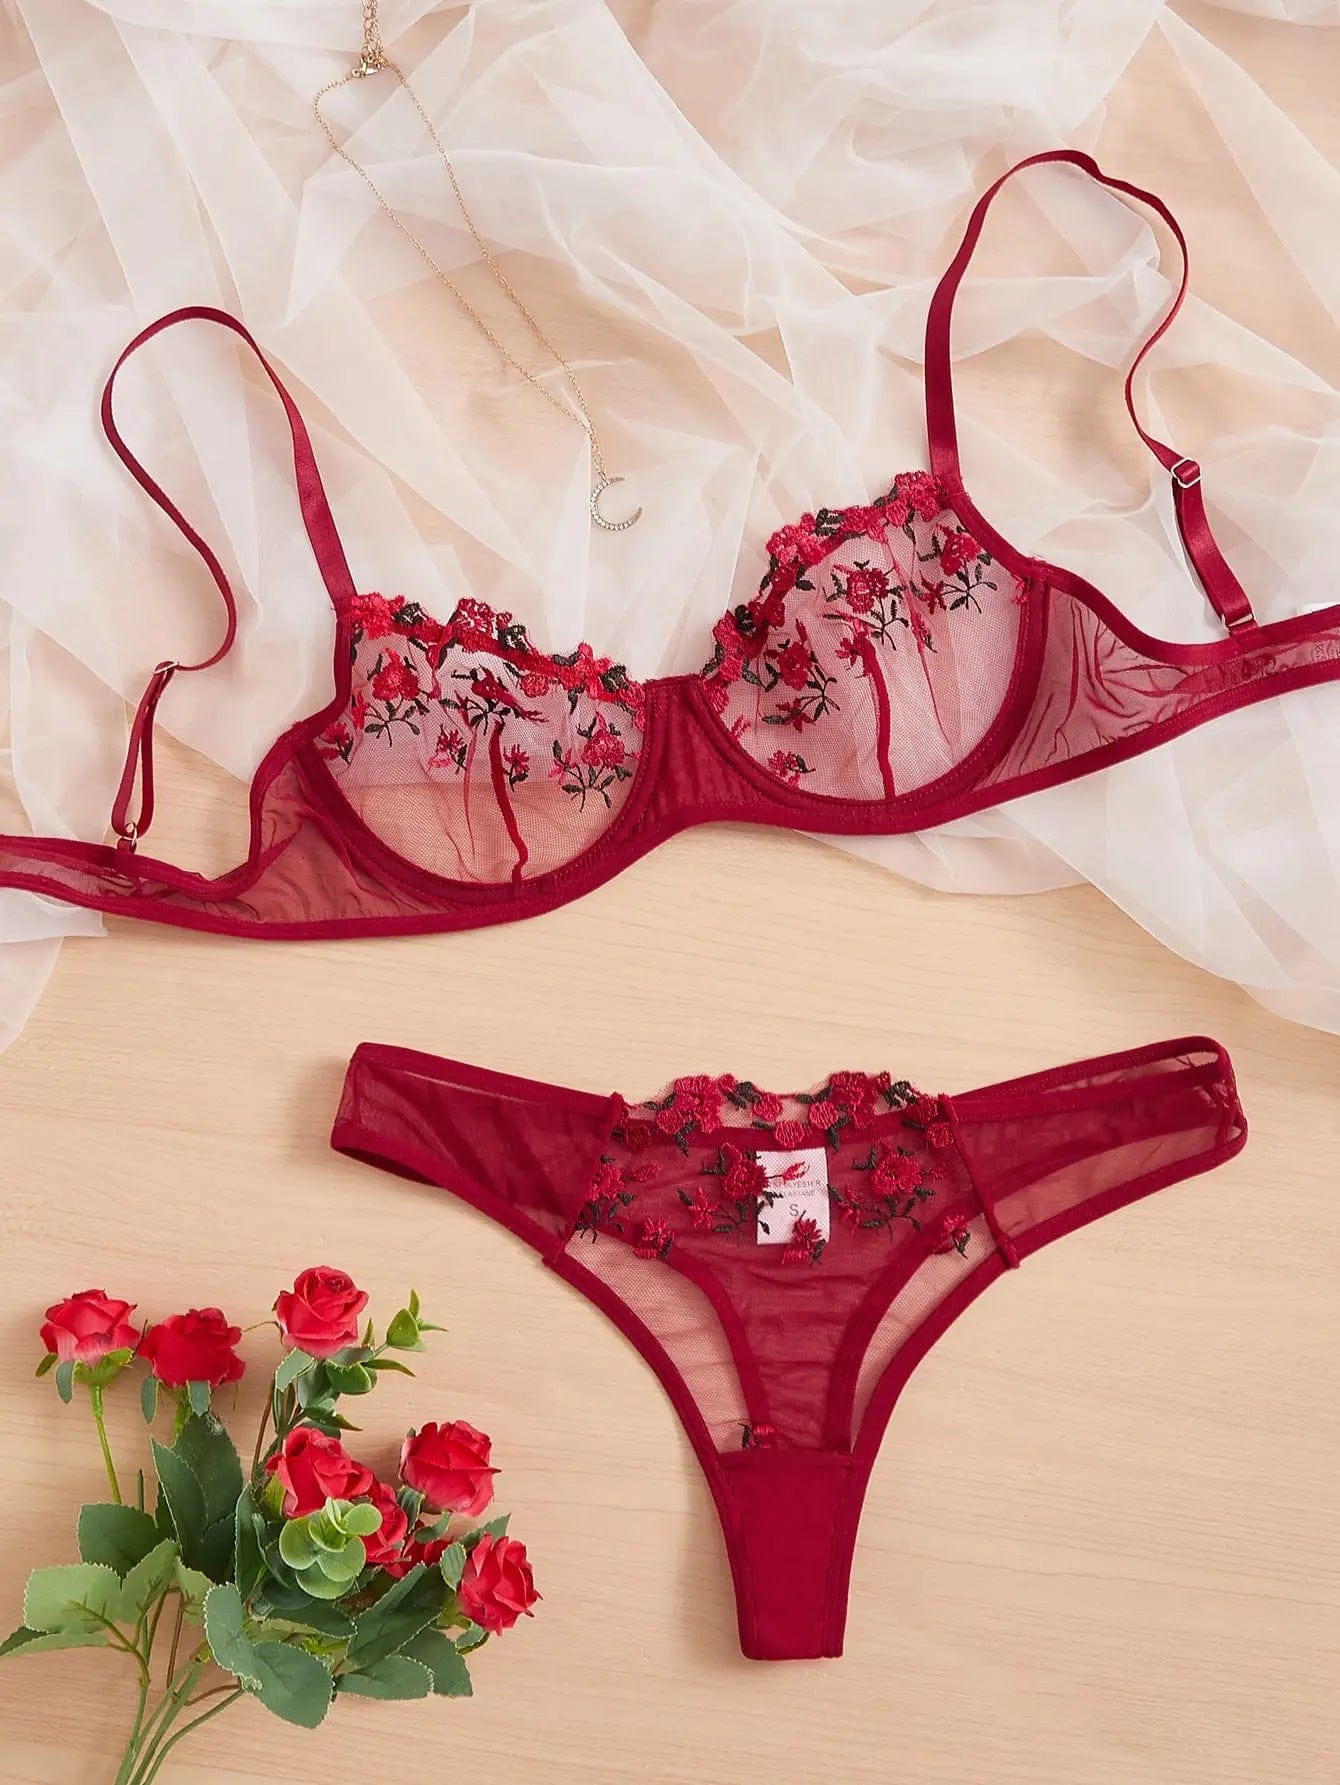 Kinky Cloth Wine Red / L Transparent Fairy Embroidery Lingerie Sets